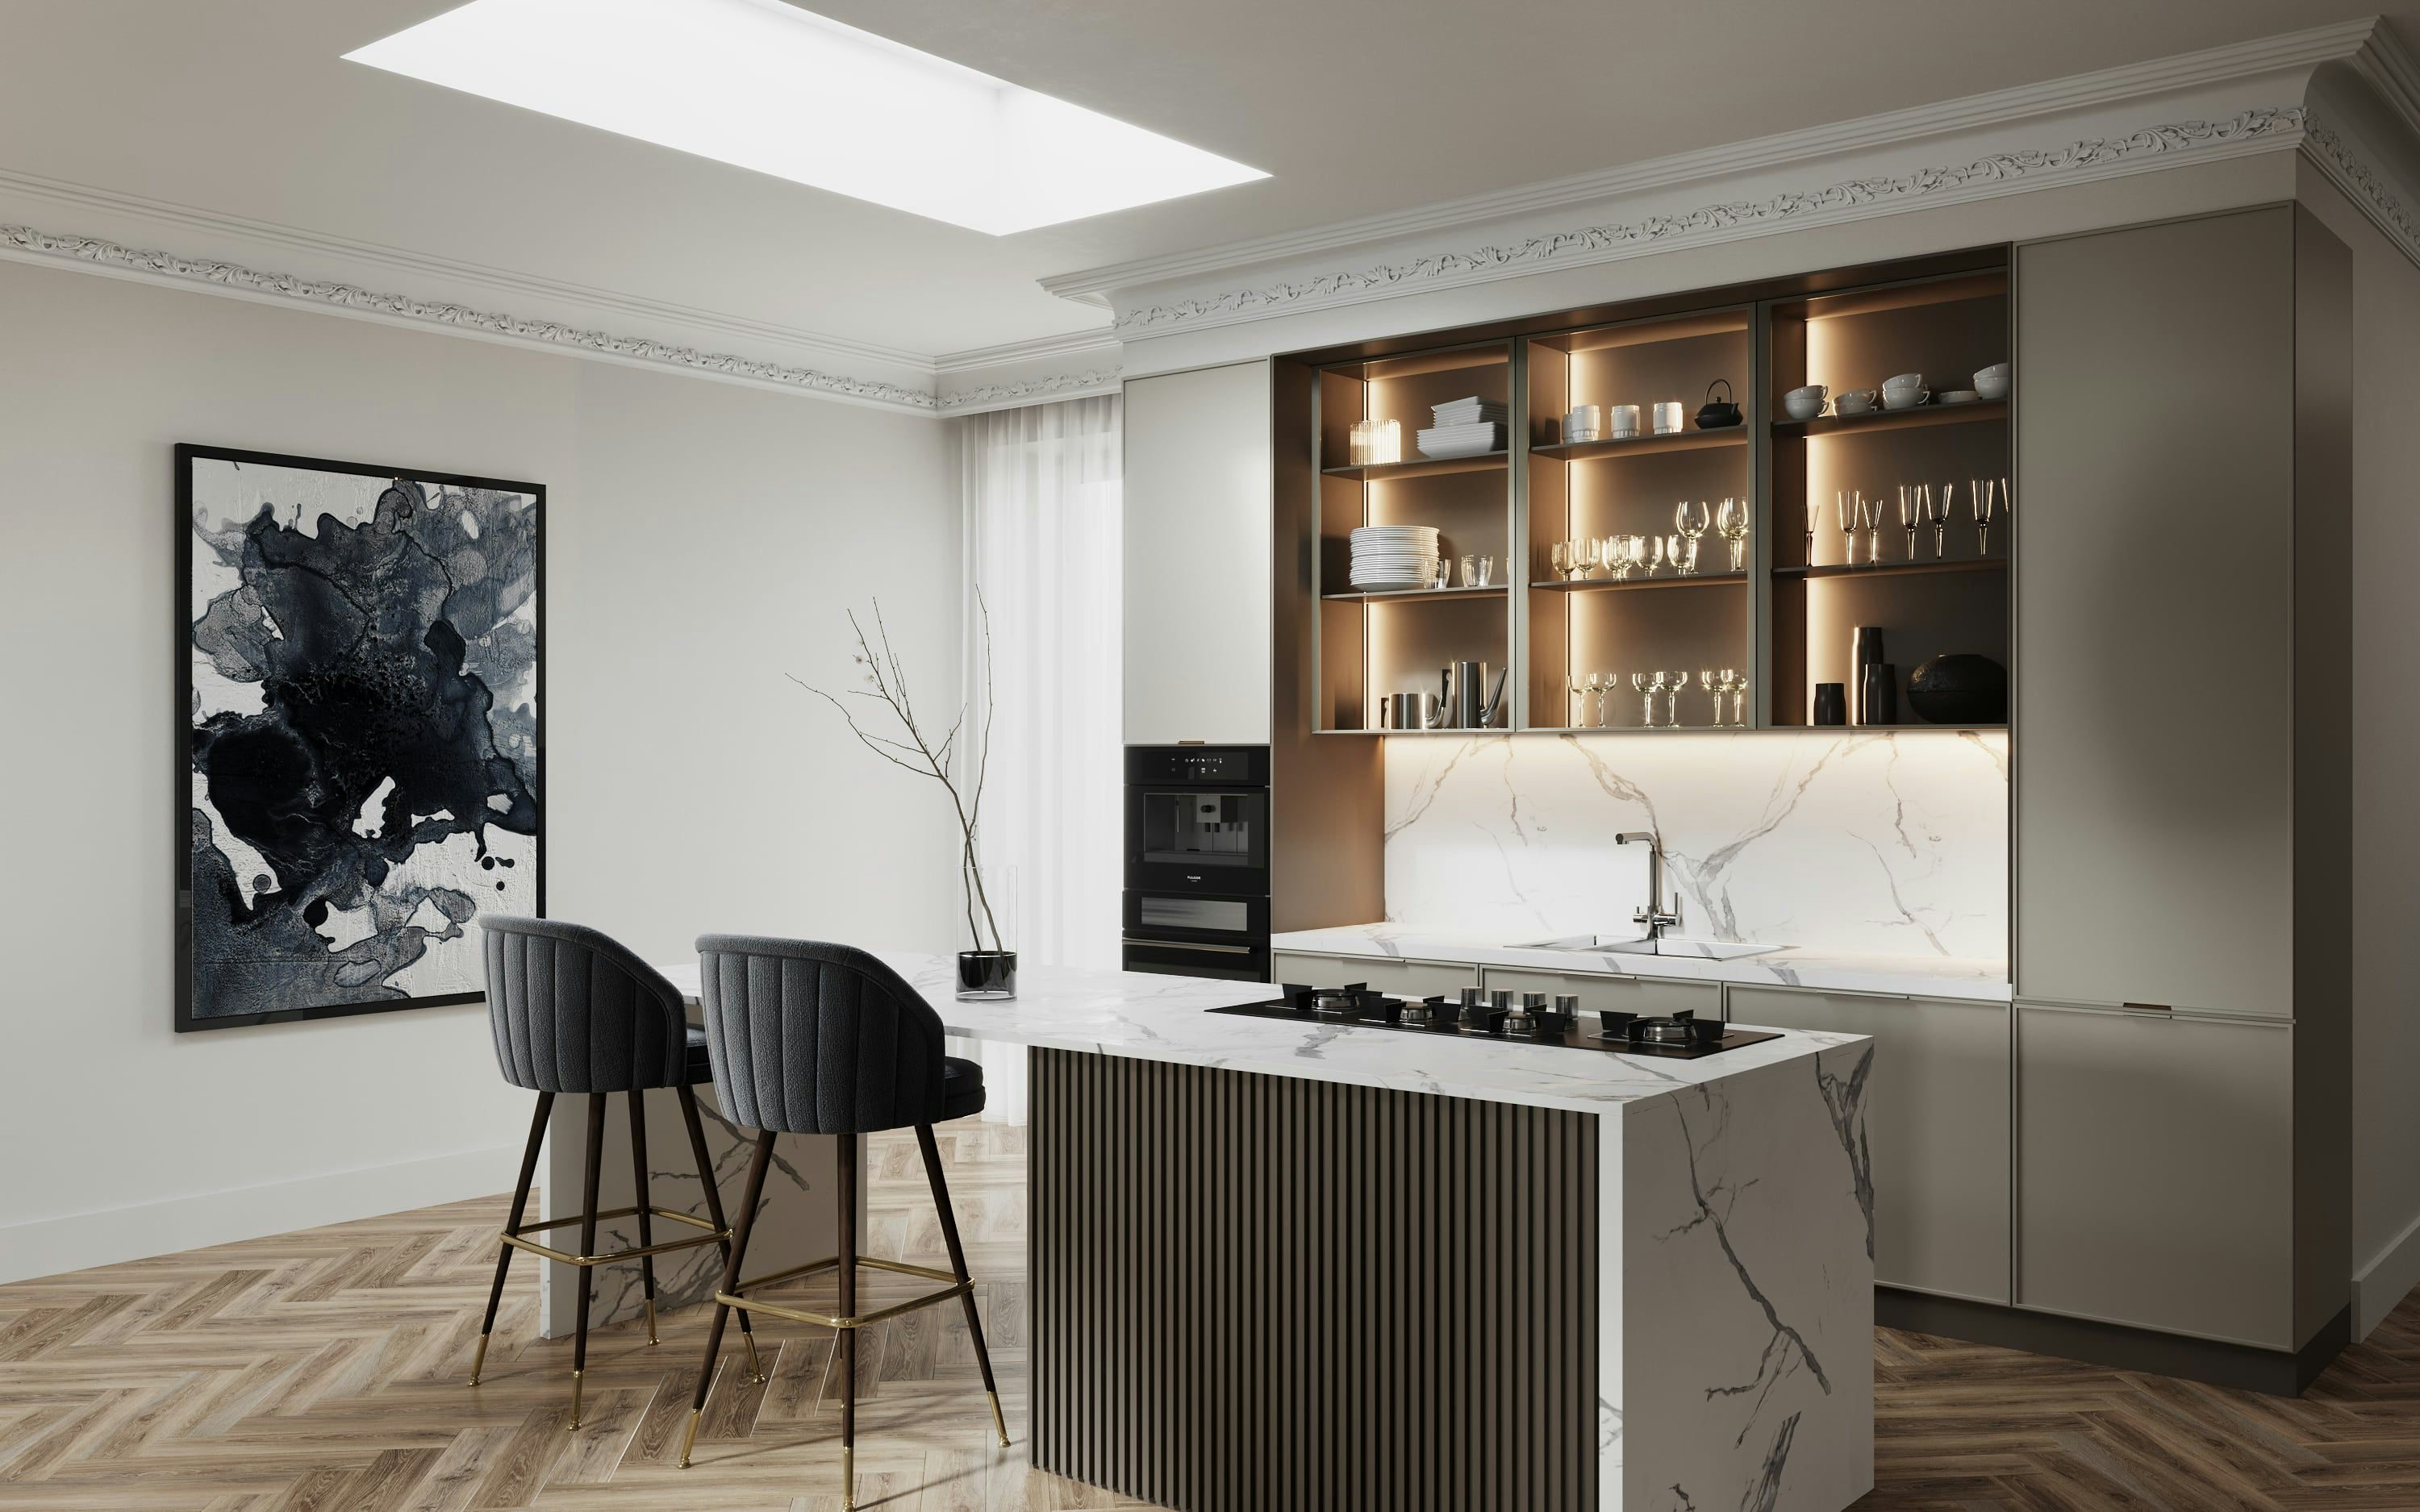 3D architectural Visualization of open space kitchen with island in renovated old building apartment, Hamburg Germany